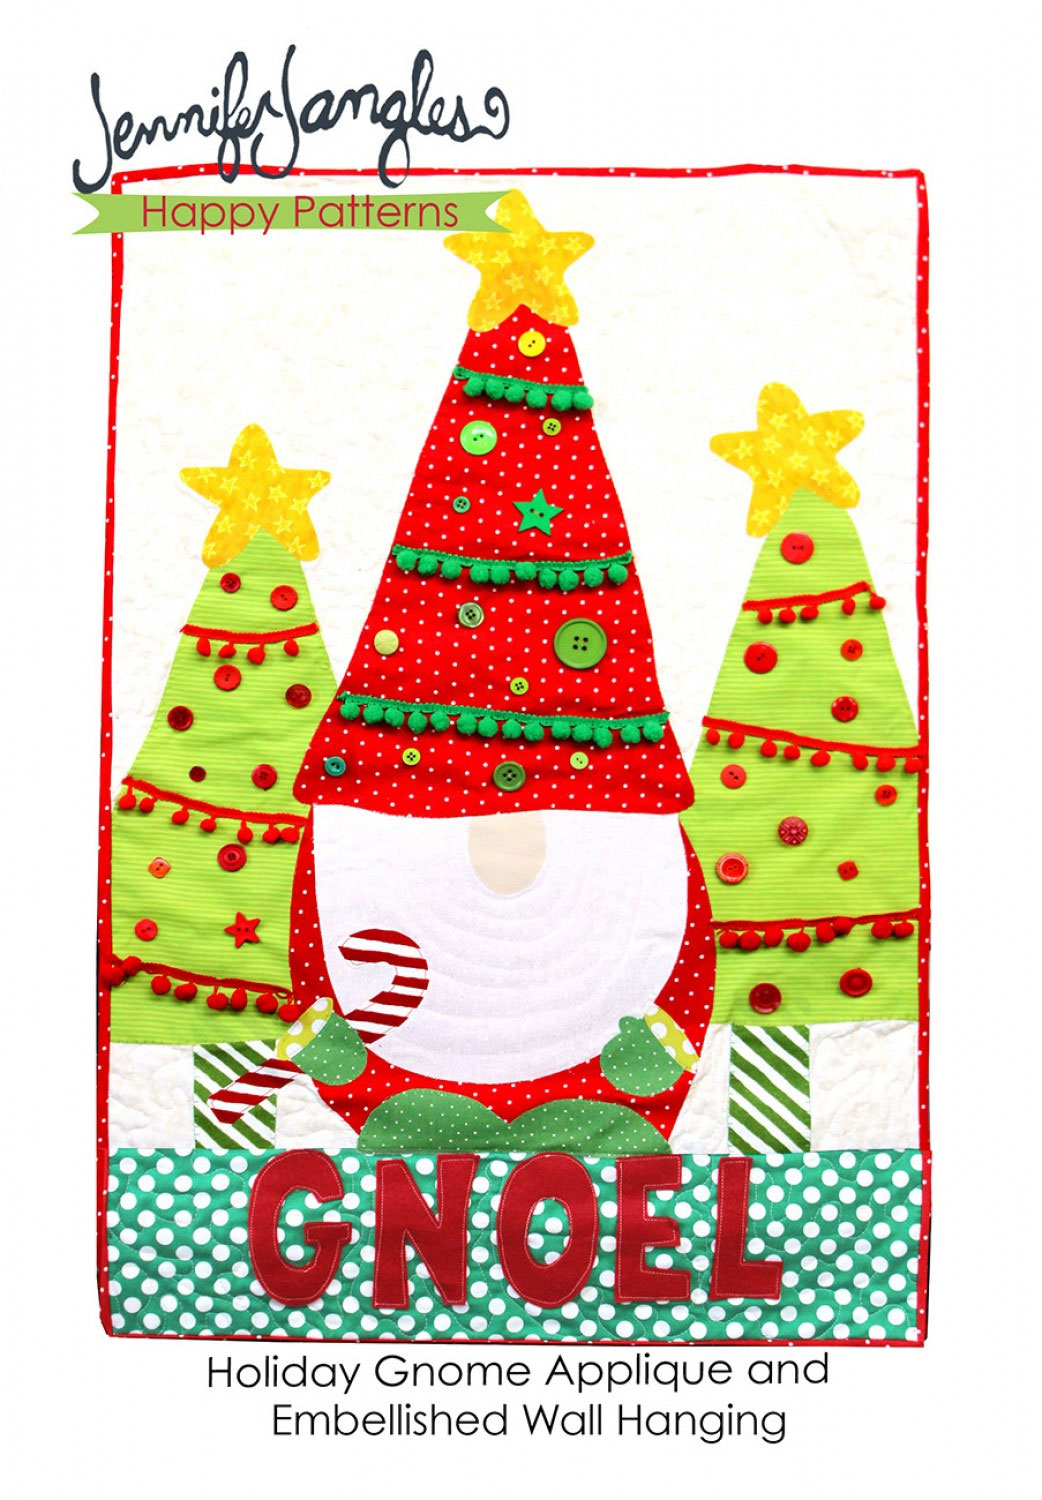 Holiday-Gnome-Applique-and-Embellished-Wall-Hanging-sewing-pattern-Jennifer-Jangles-front